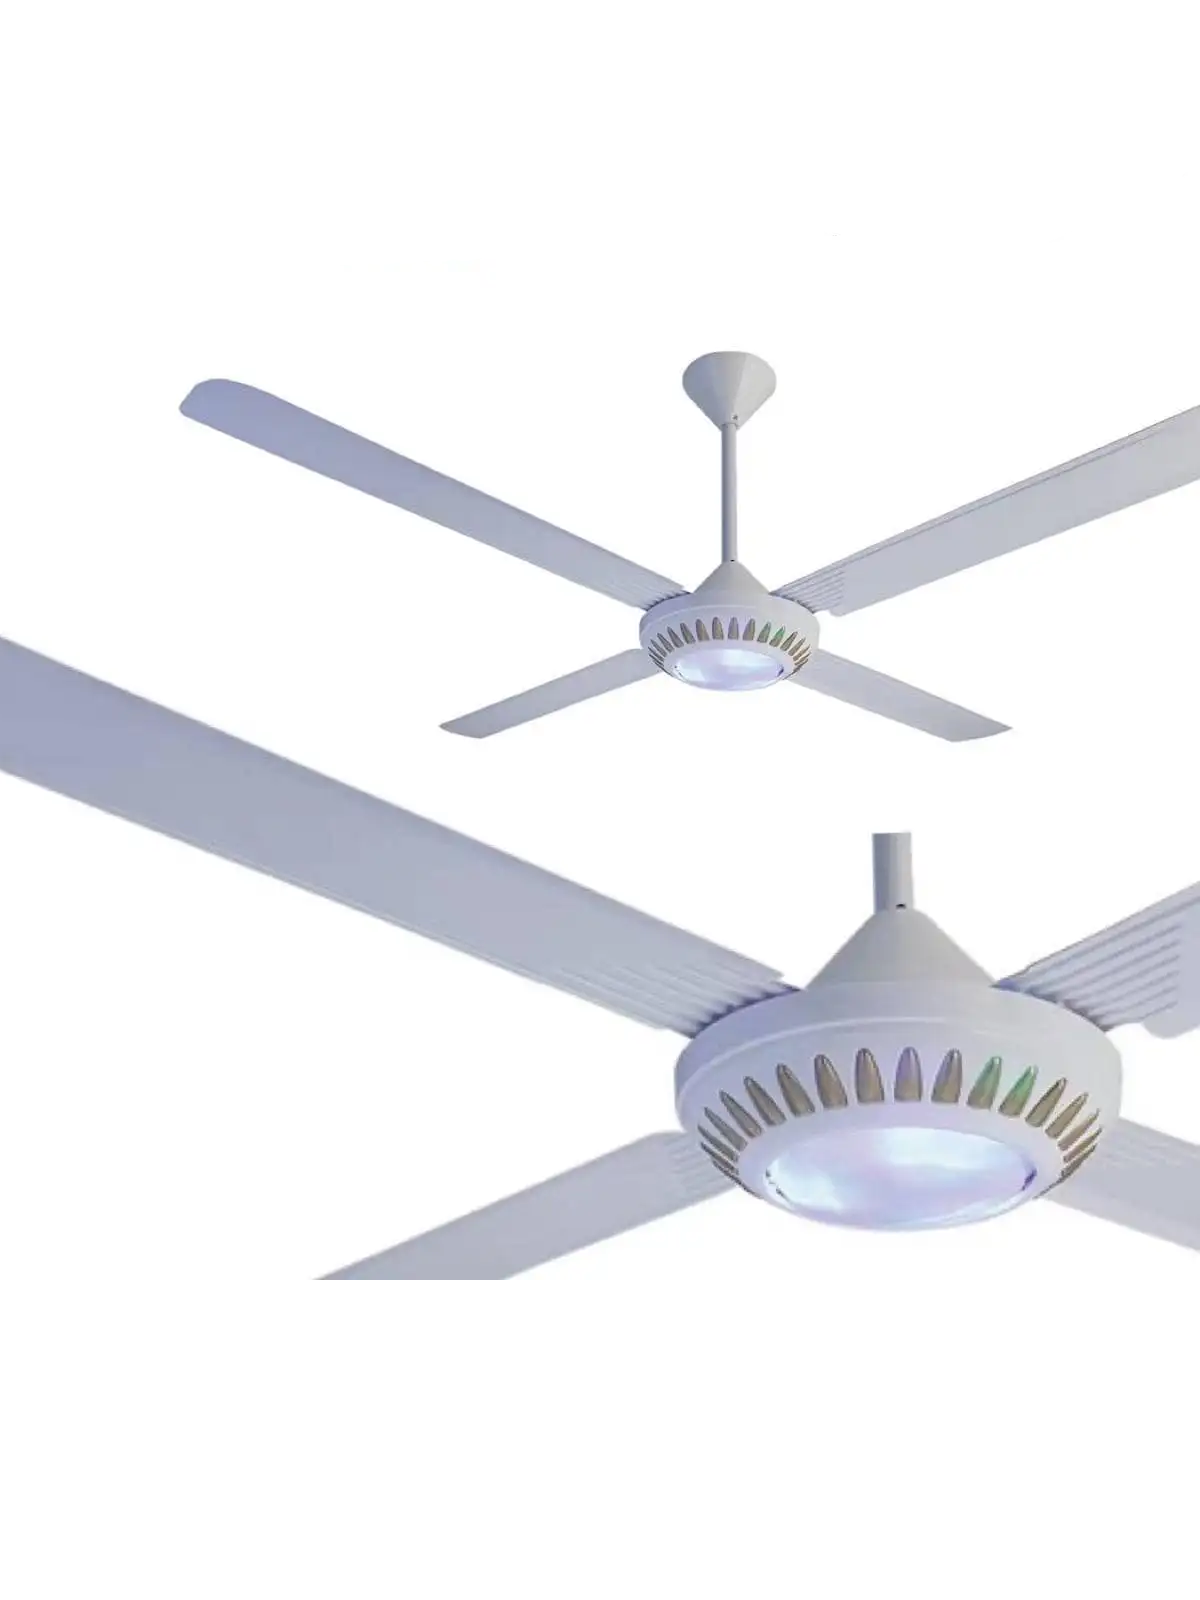 A ceiling fan with a distinctive design and a powerful light bulb from B National